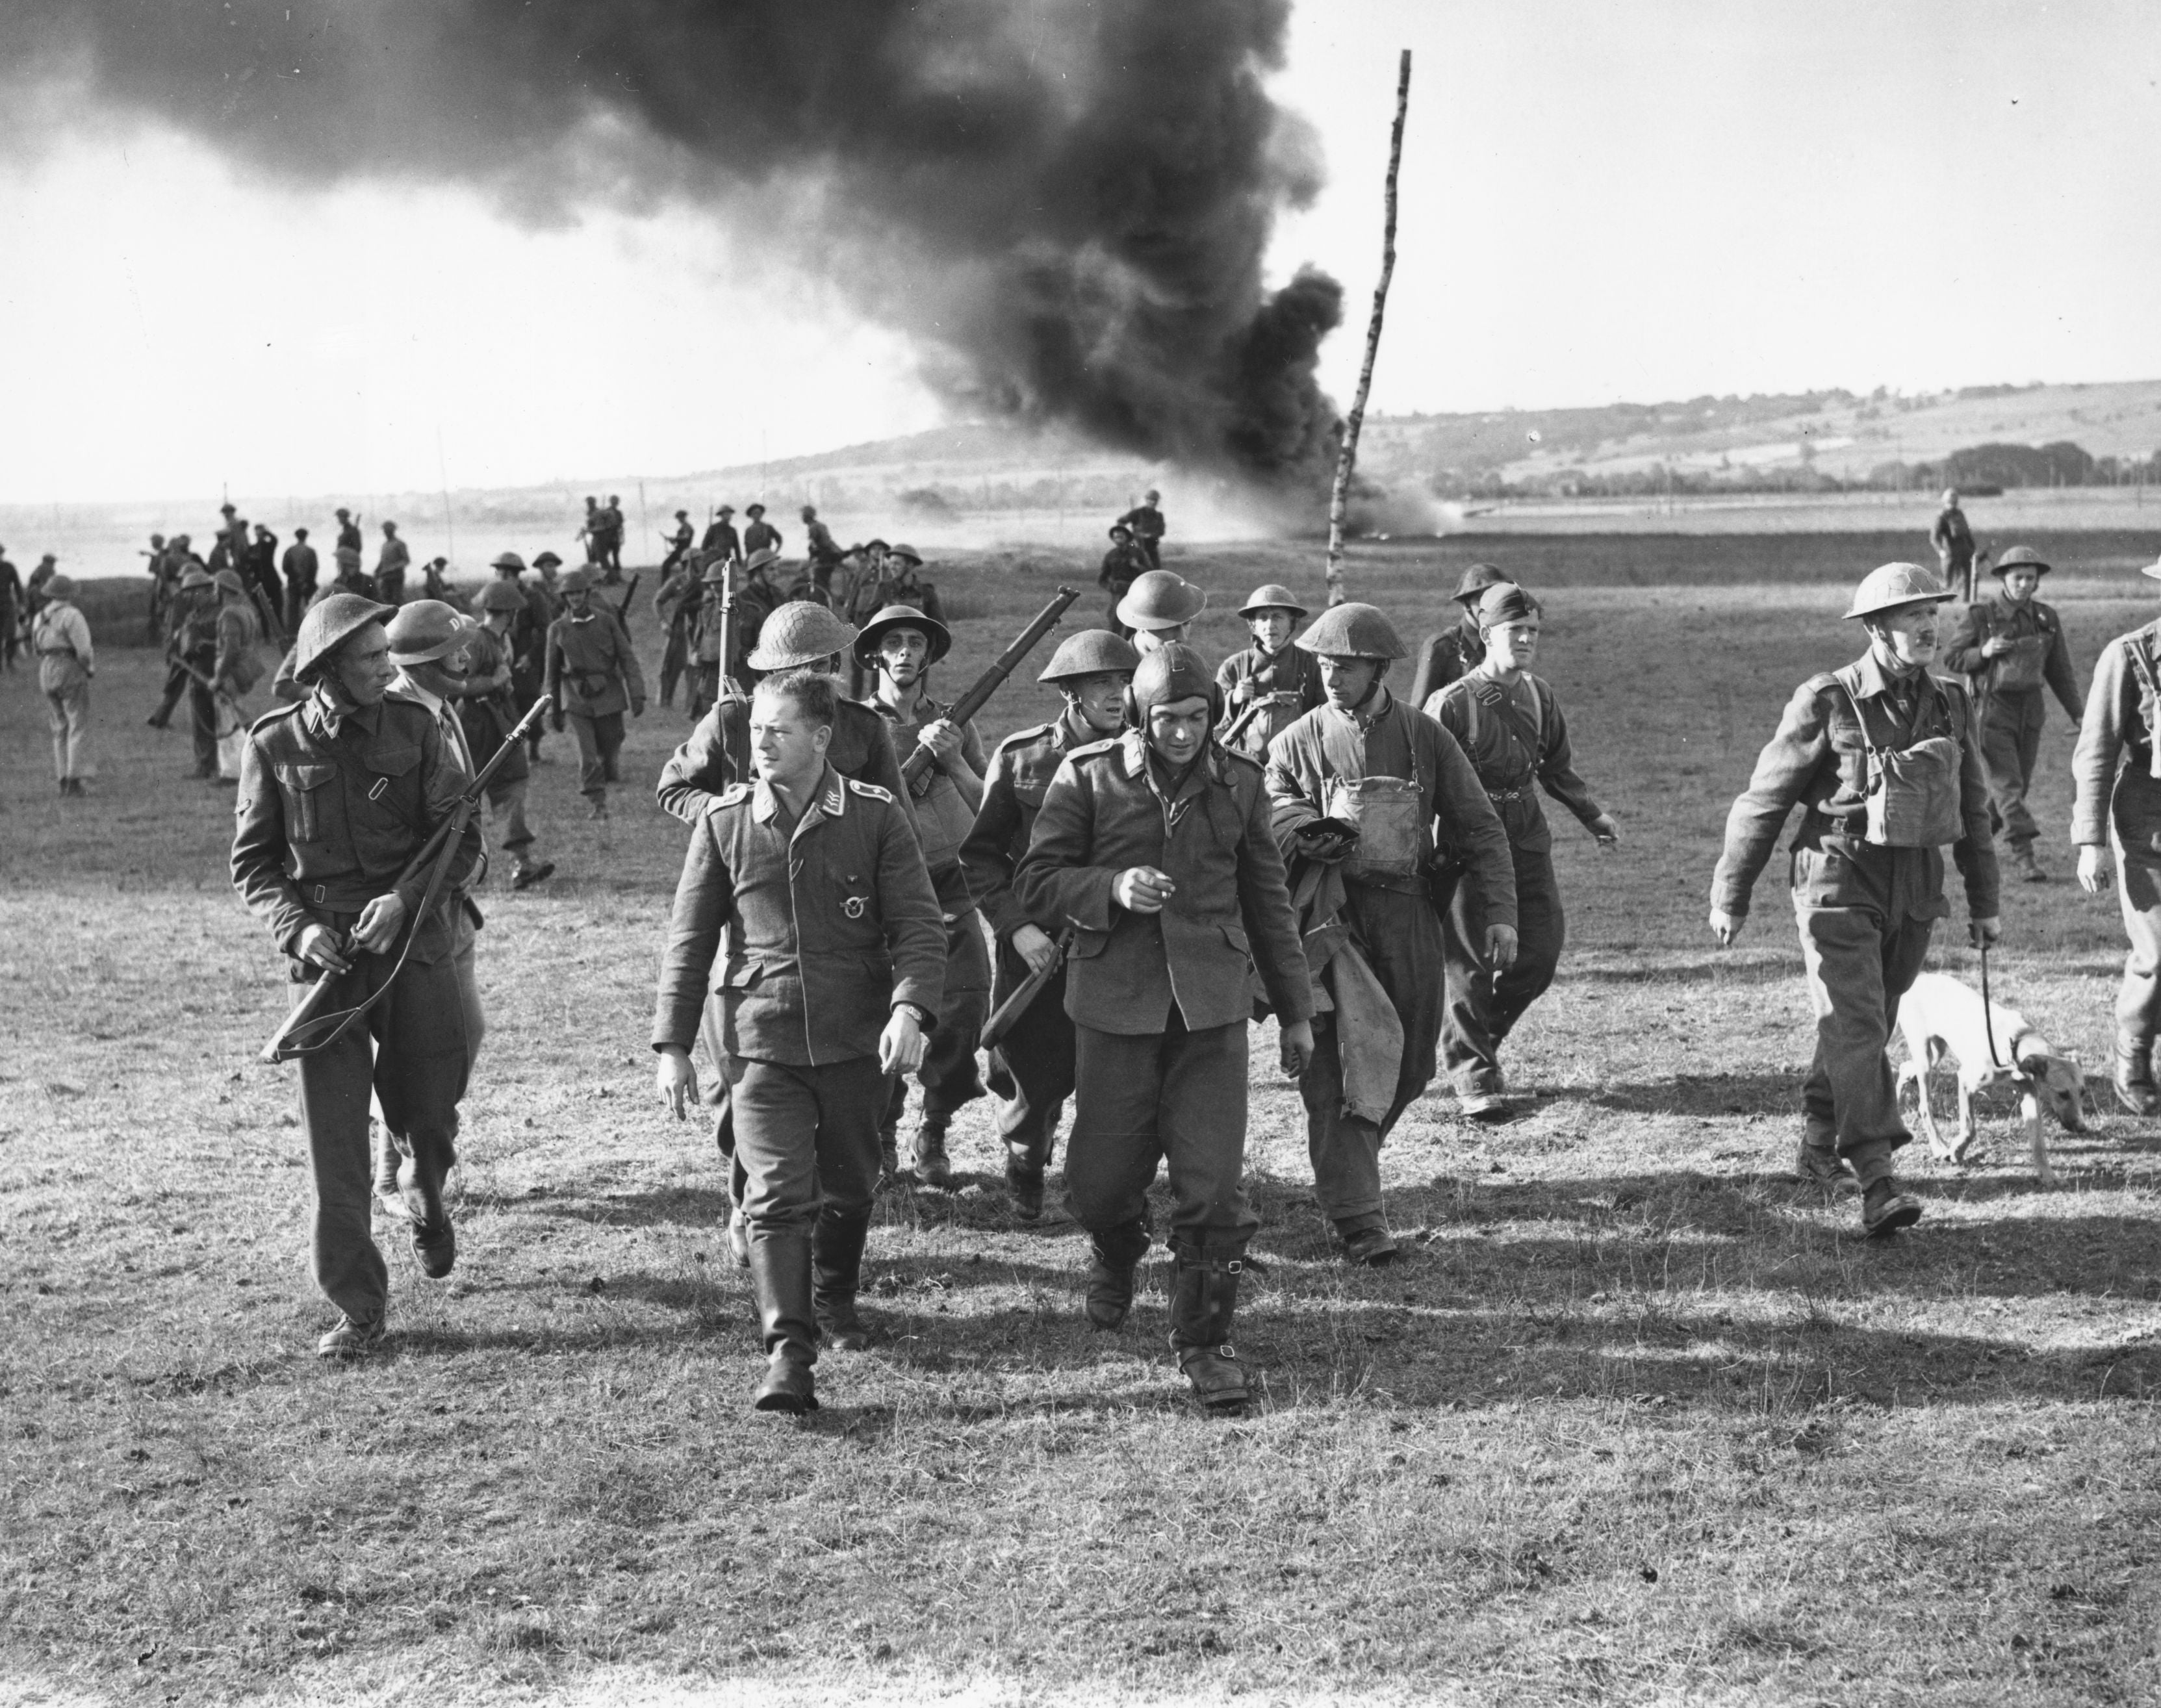 German airmen, who parachuted from a shot-down bomber are marched off by the Home Guard in Goodwood, Sussex